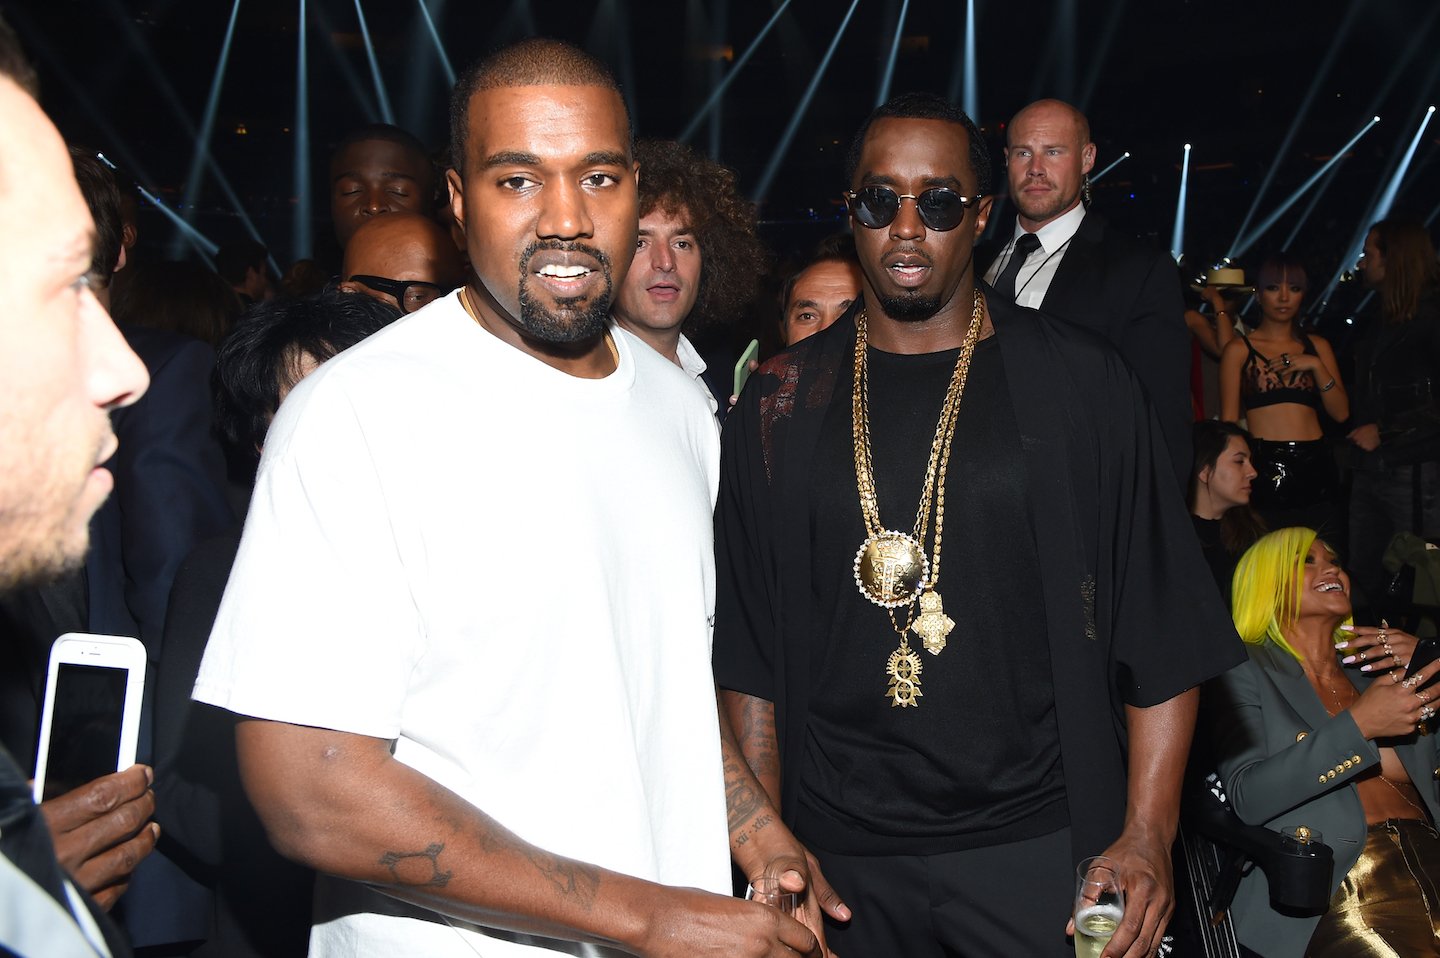 Kanye West and Sean "Diddy" Combs in a crowd at the 2016 MTV Video Music Awards